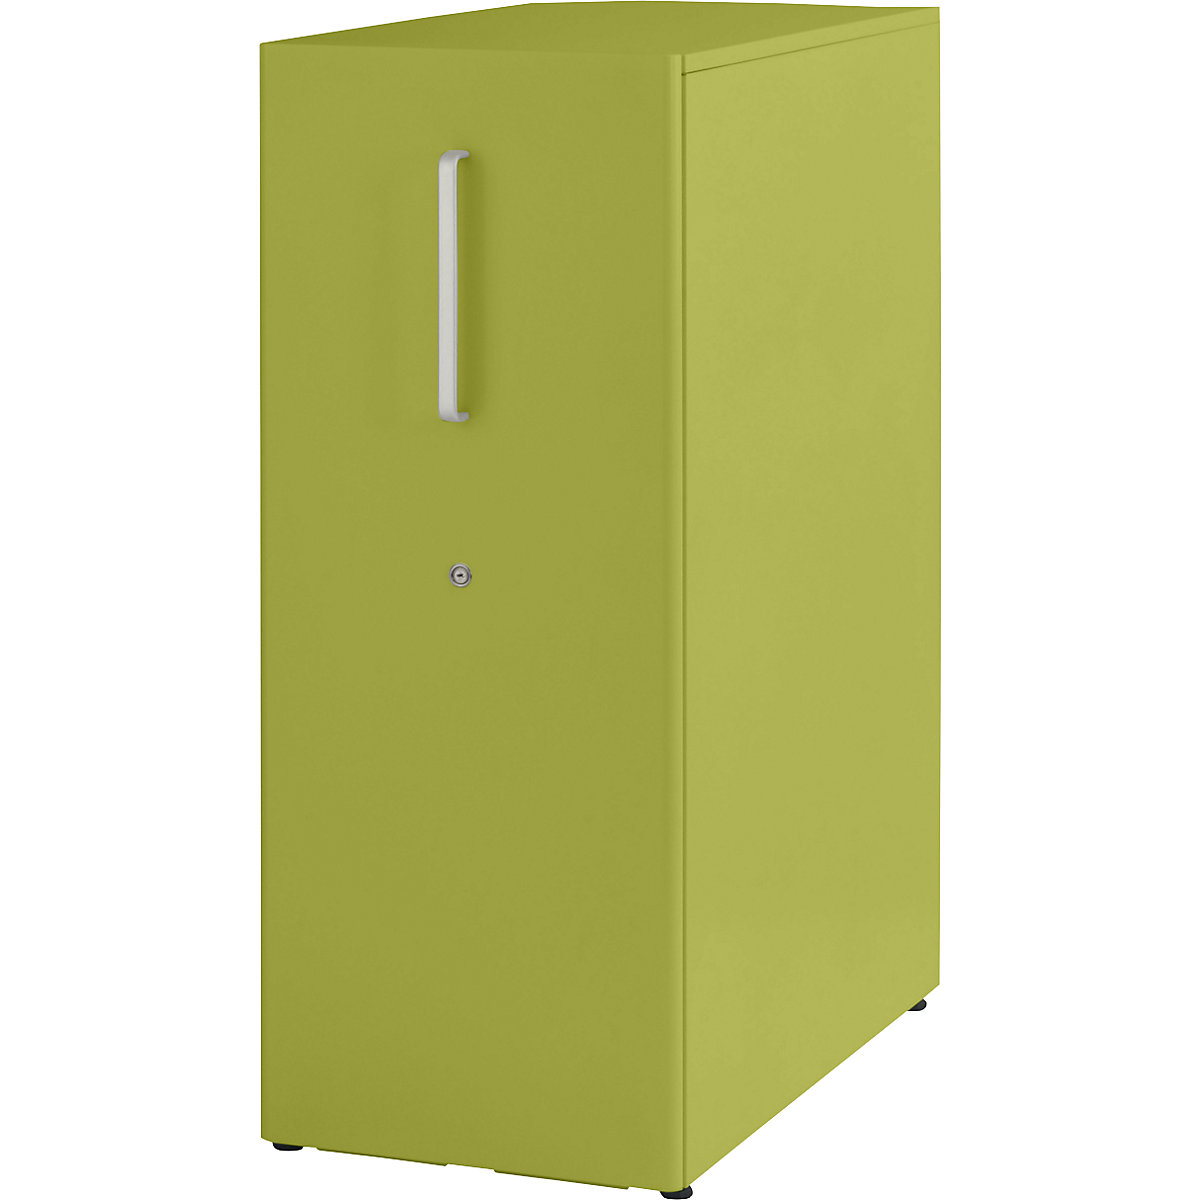 Tower™ 3 add-on furniture, with worktop – BISLEY, for the right side, 2 shelves, green-7